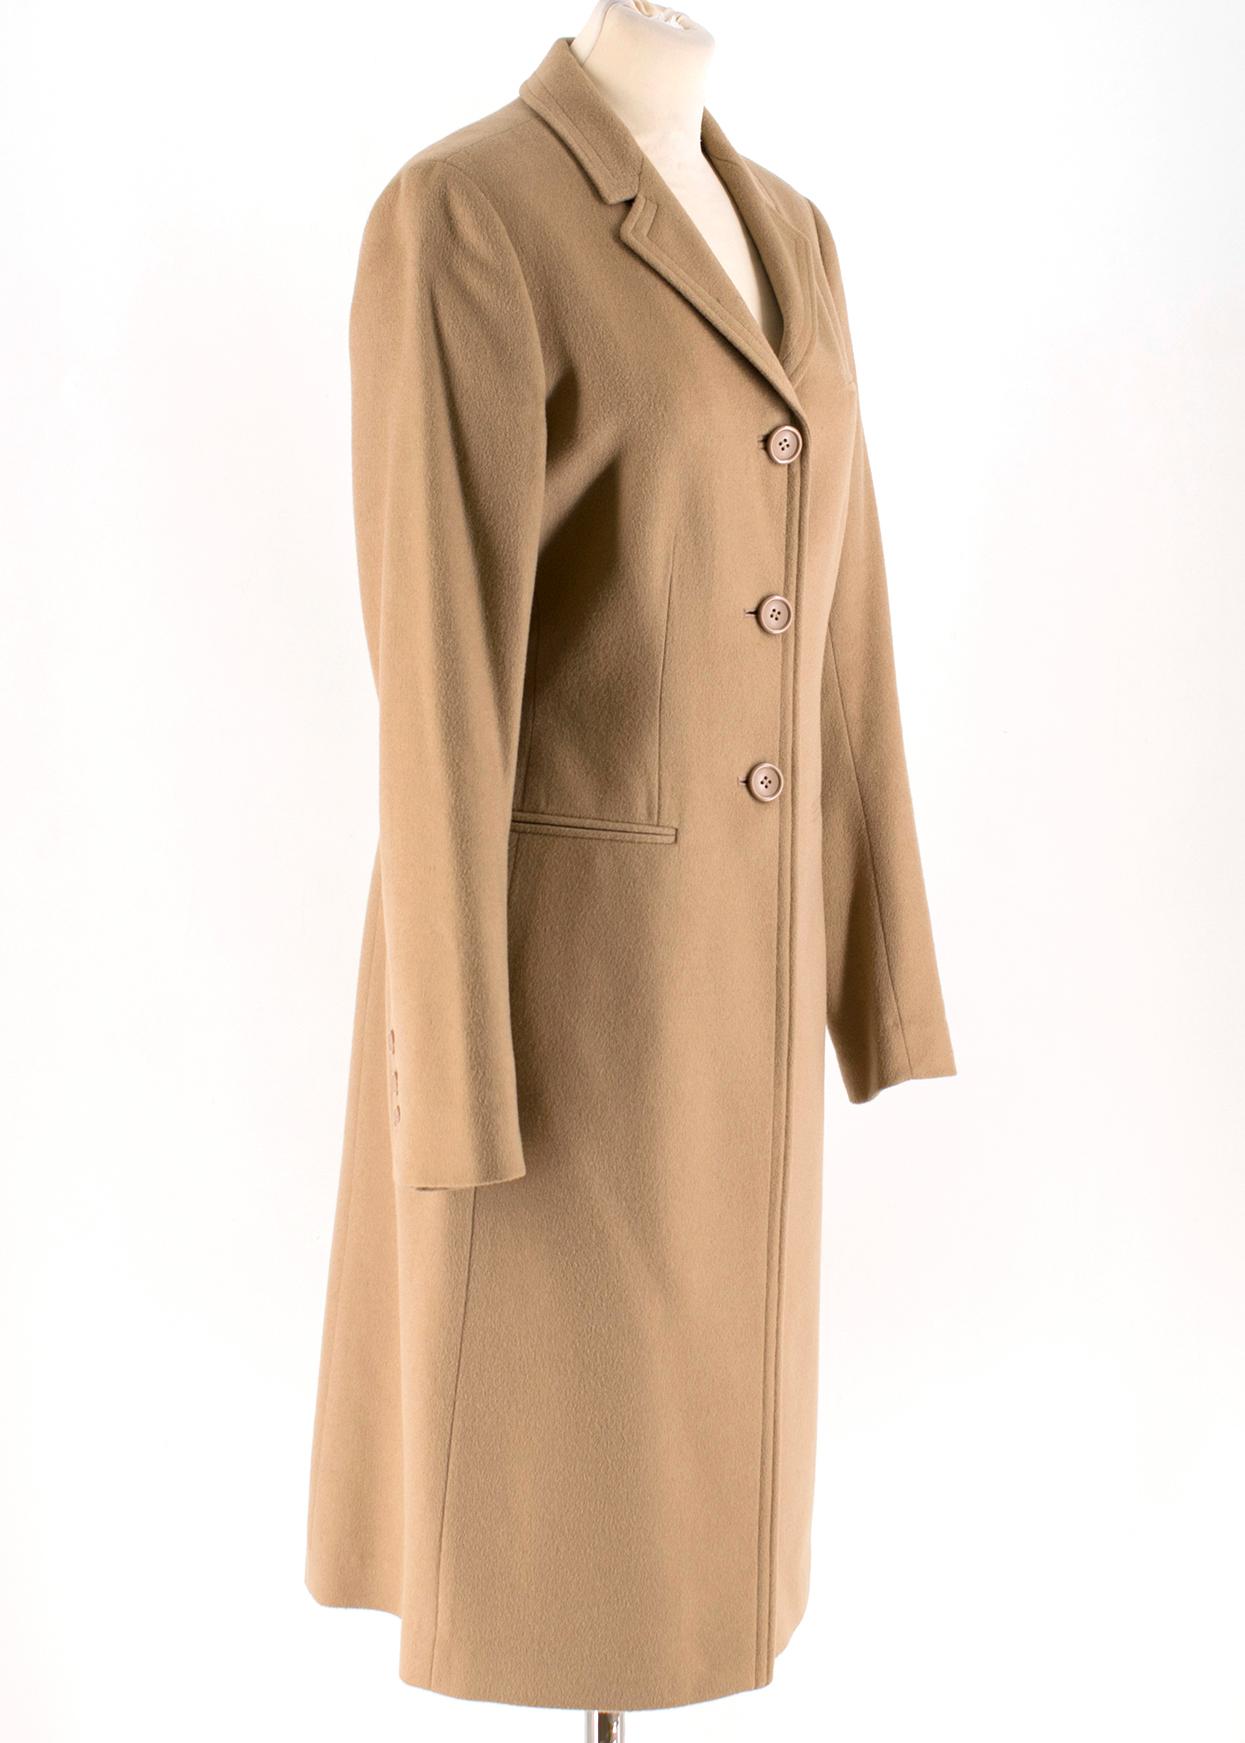 Calvin Klein Camel Wool & Cashmere Blend Coat 

- Wool and cashmere blend coat
- Long sleeves
- Standard notch collar
- Front centre snap button closure
- Mid-weight
- Non functional pockets

Please note, these items are pre-owned and may show signs